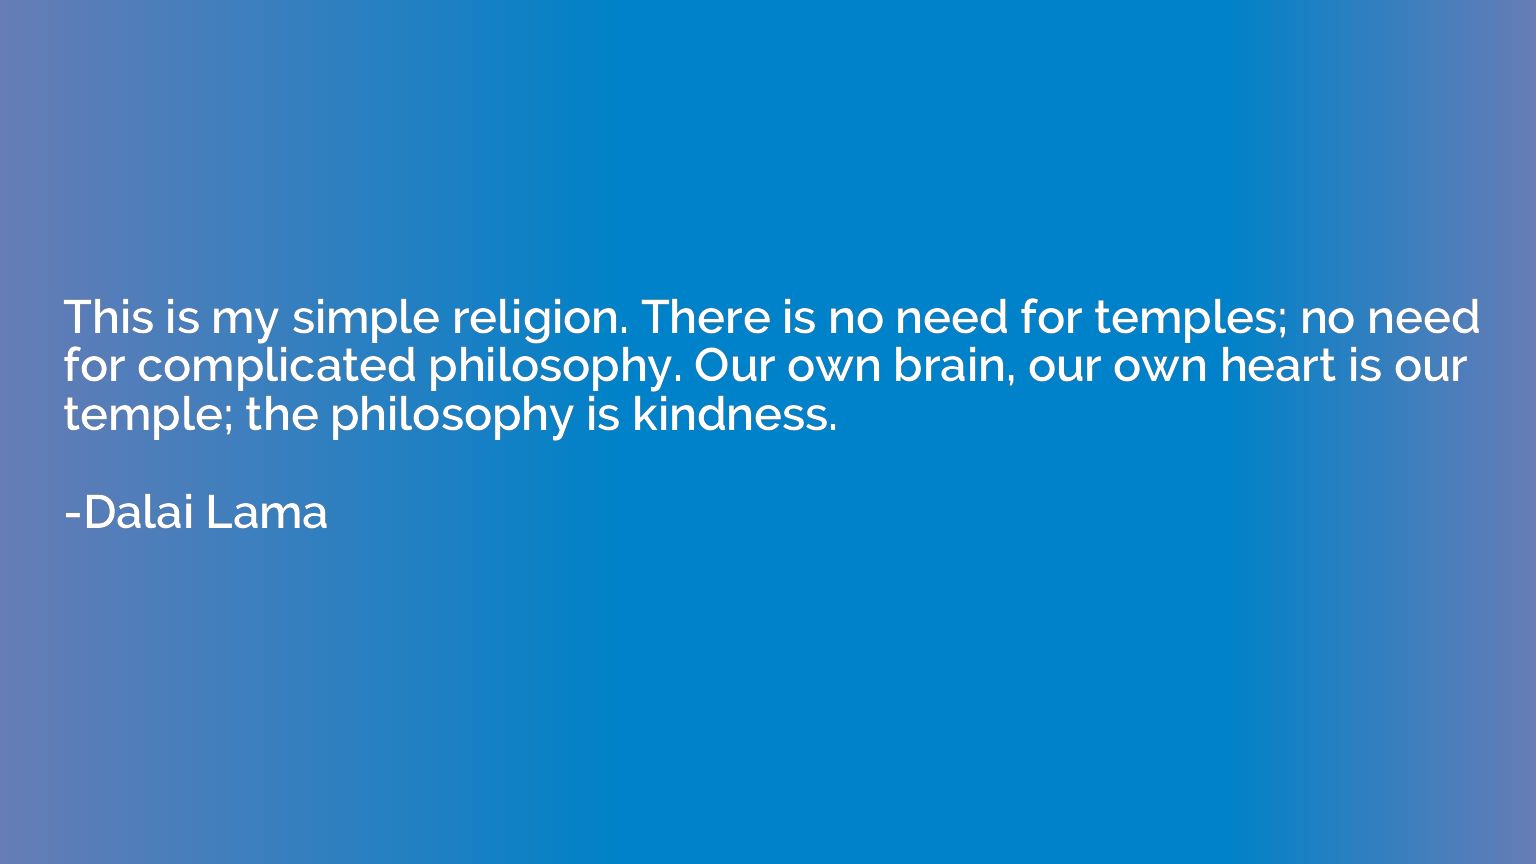 This is my simple religion. There is no need for temples; no